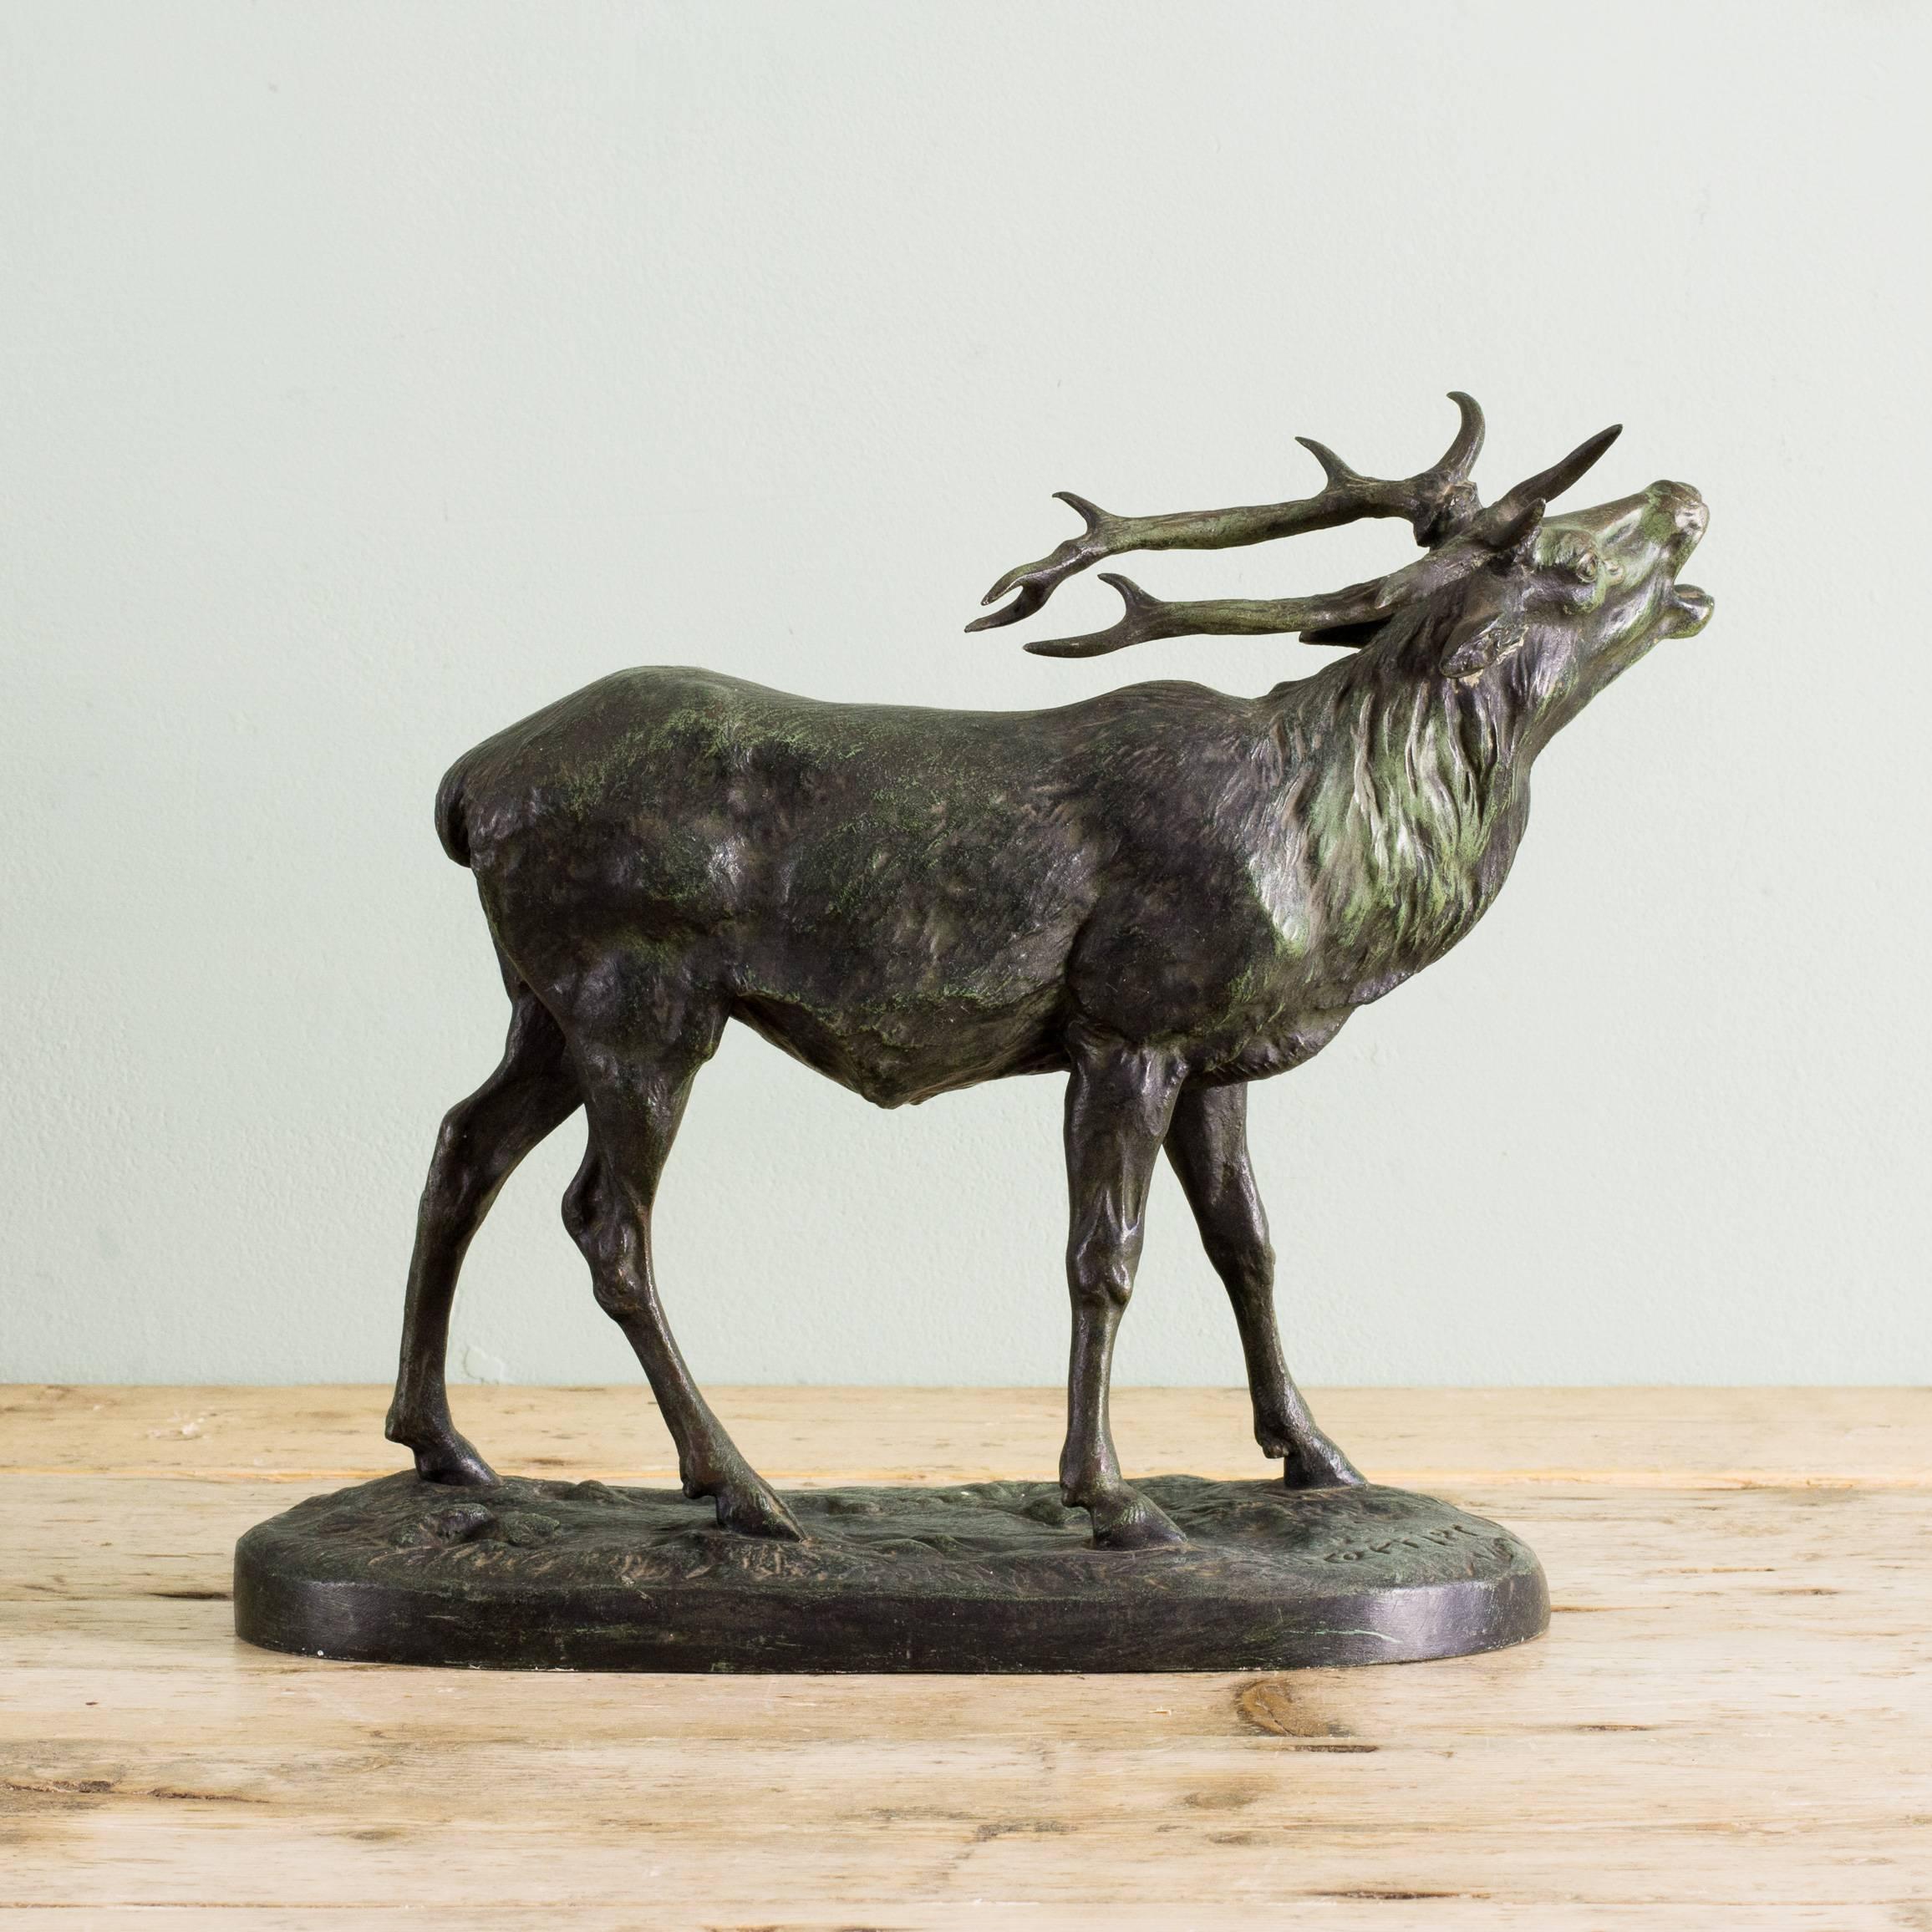 A French bronze sculpture of a stag, signed J. Terrier, after the 19th century original by Charles Valton.